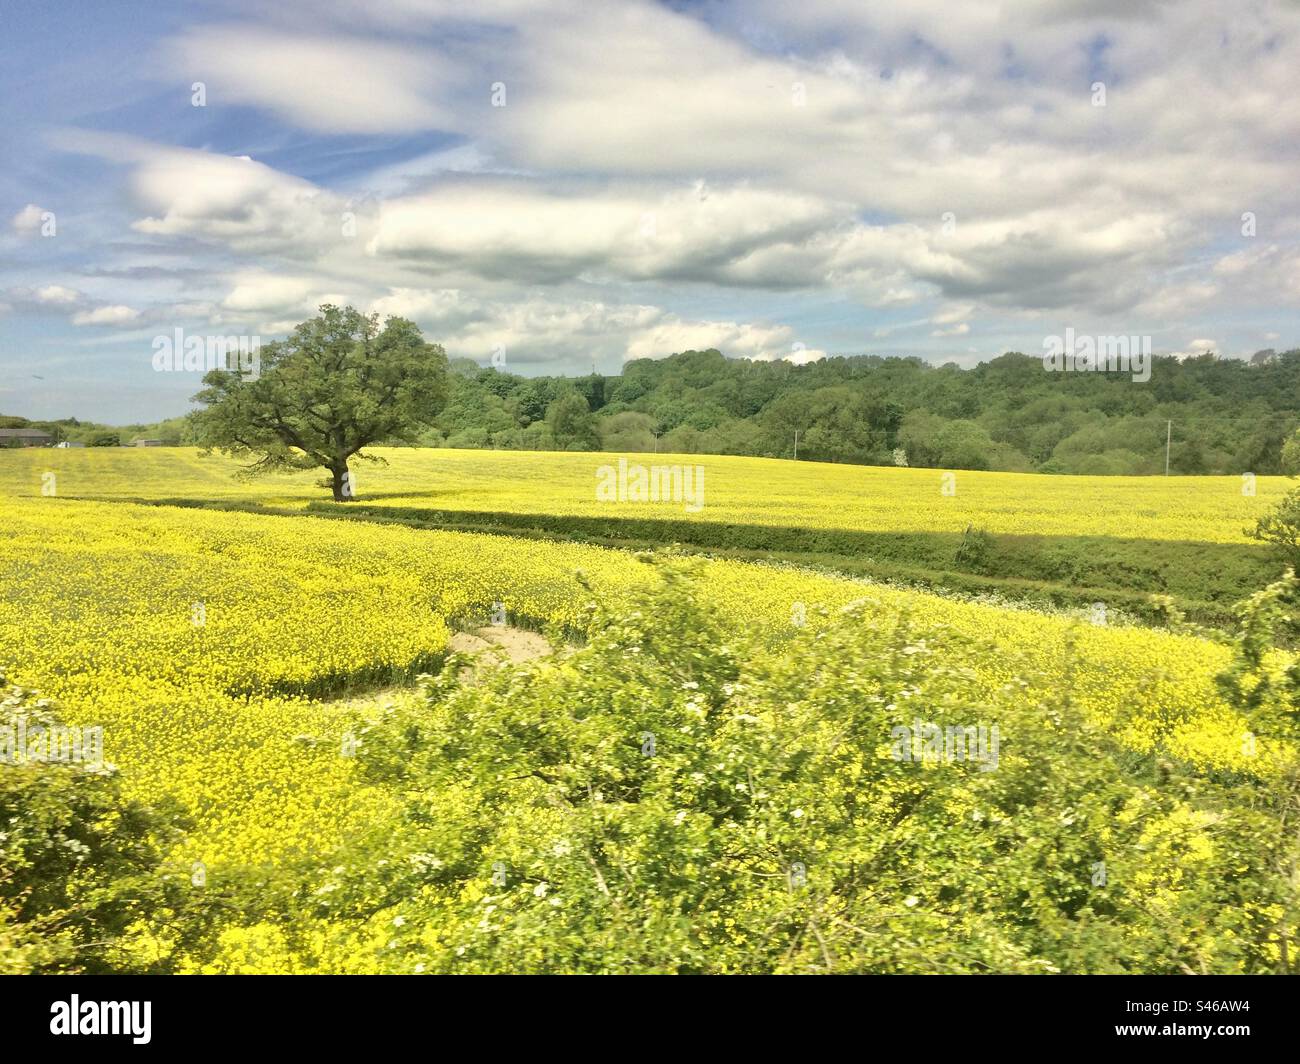 Amazing view of a lonely tree with Brassica Napus field in Yorkshire, UK Stock Photo